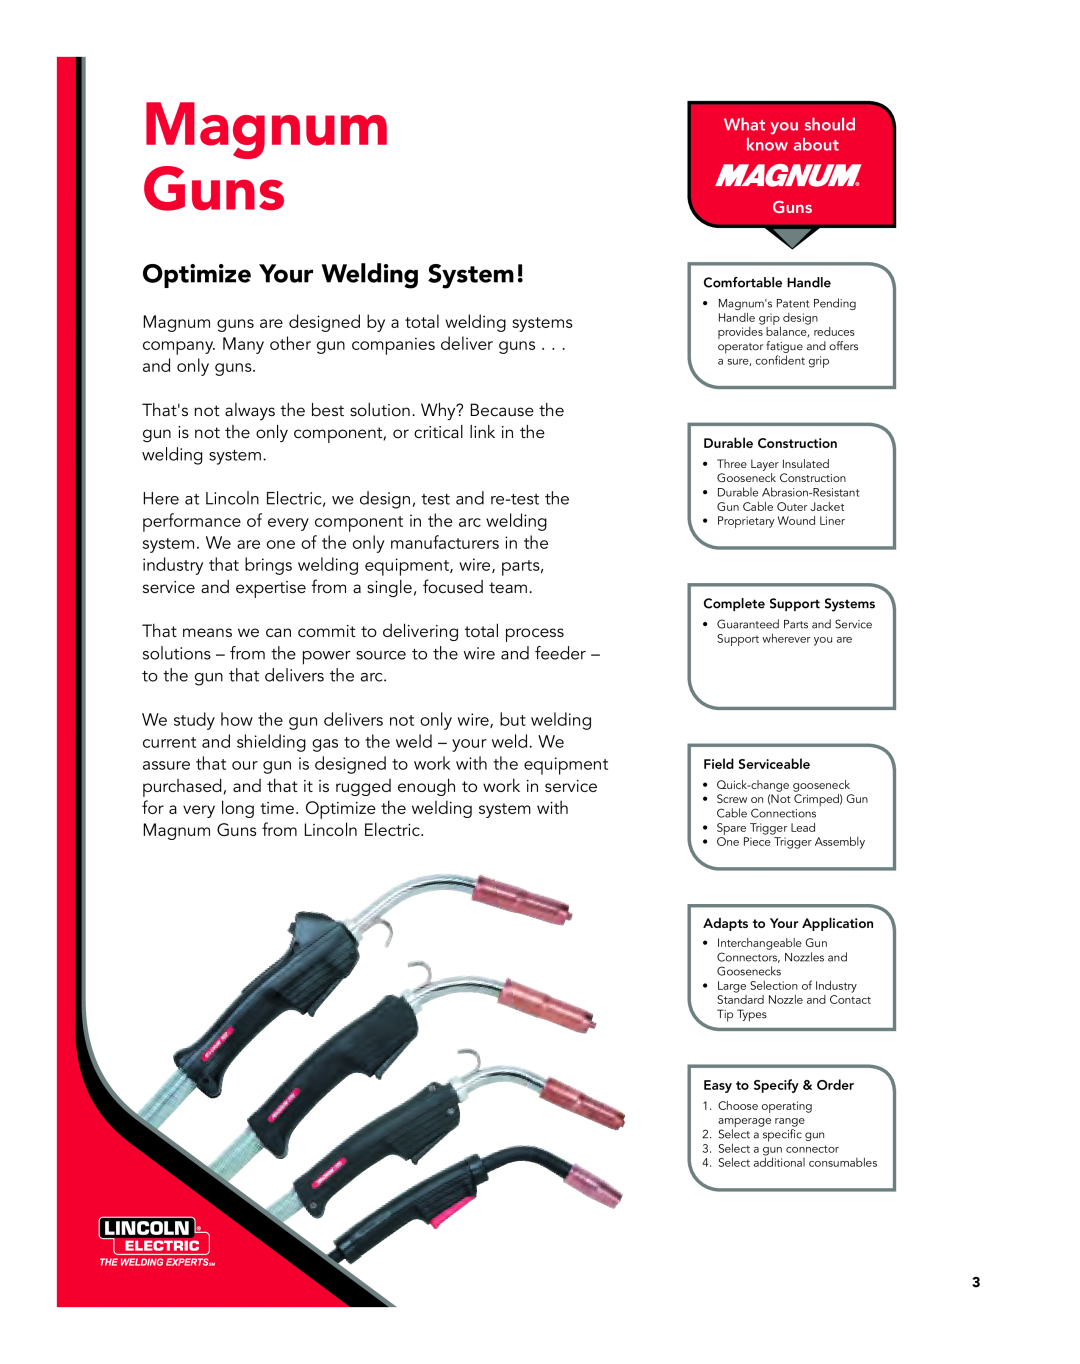 Lincoln Electric manual Magnum Guns, Optimize Your Welding System 